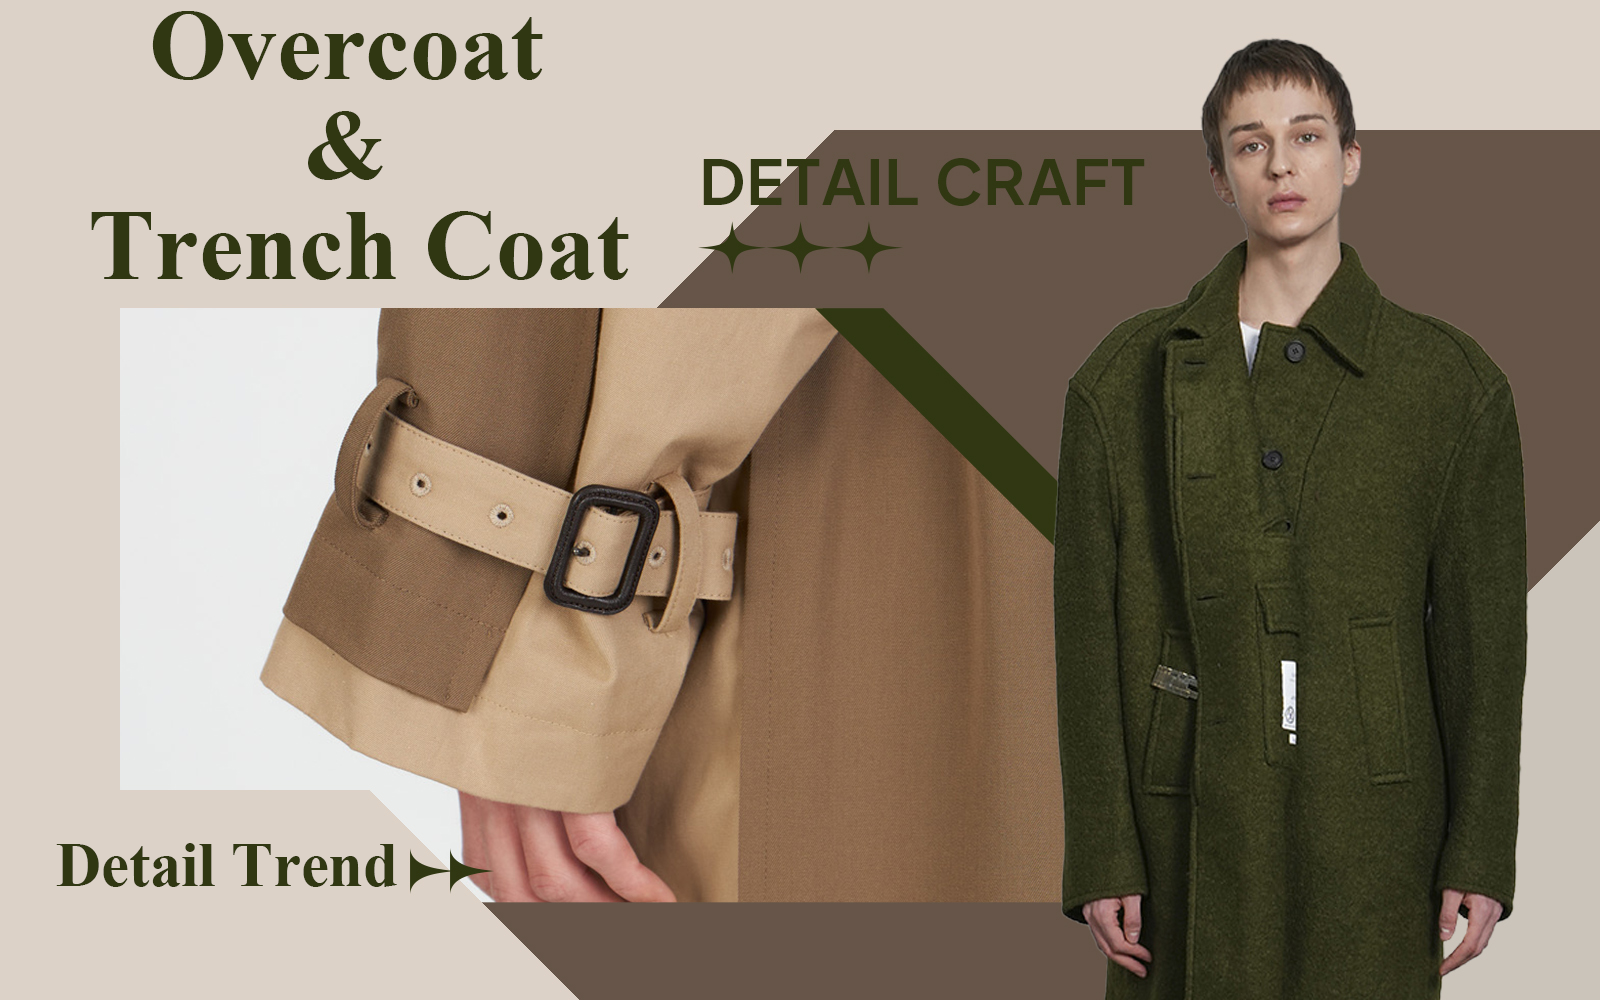 Classic Innovation -- The Detail & Craft Trend for Men's Overcoat & Trench Coat